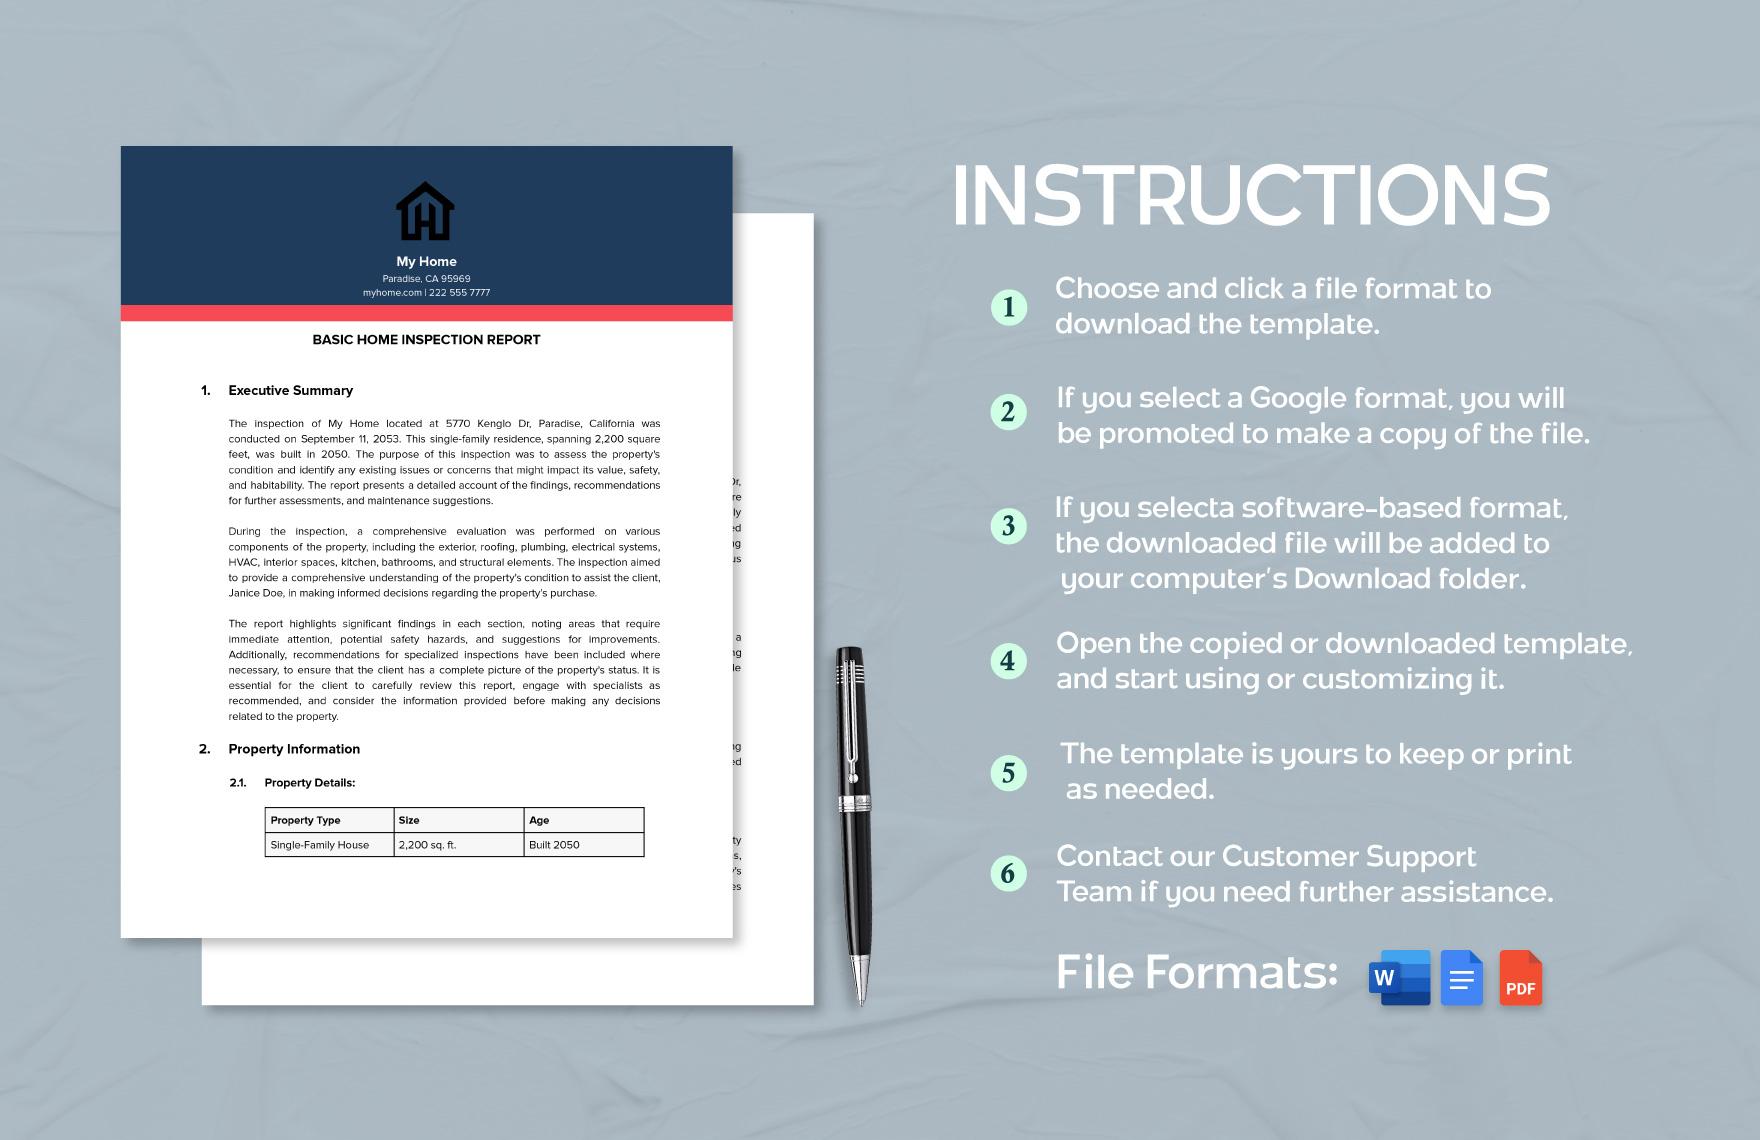 Basic Home Inspection Report Template